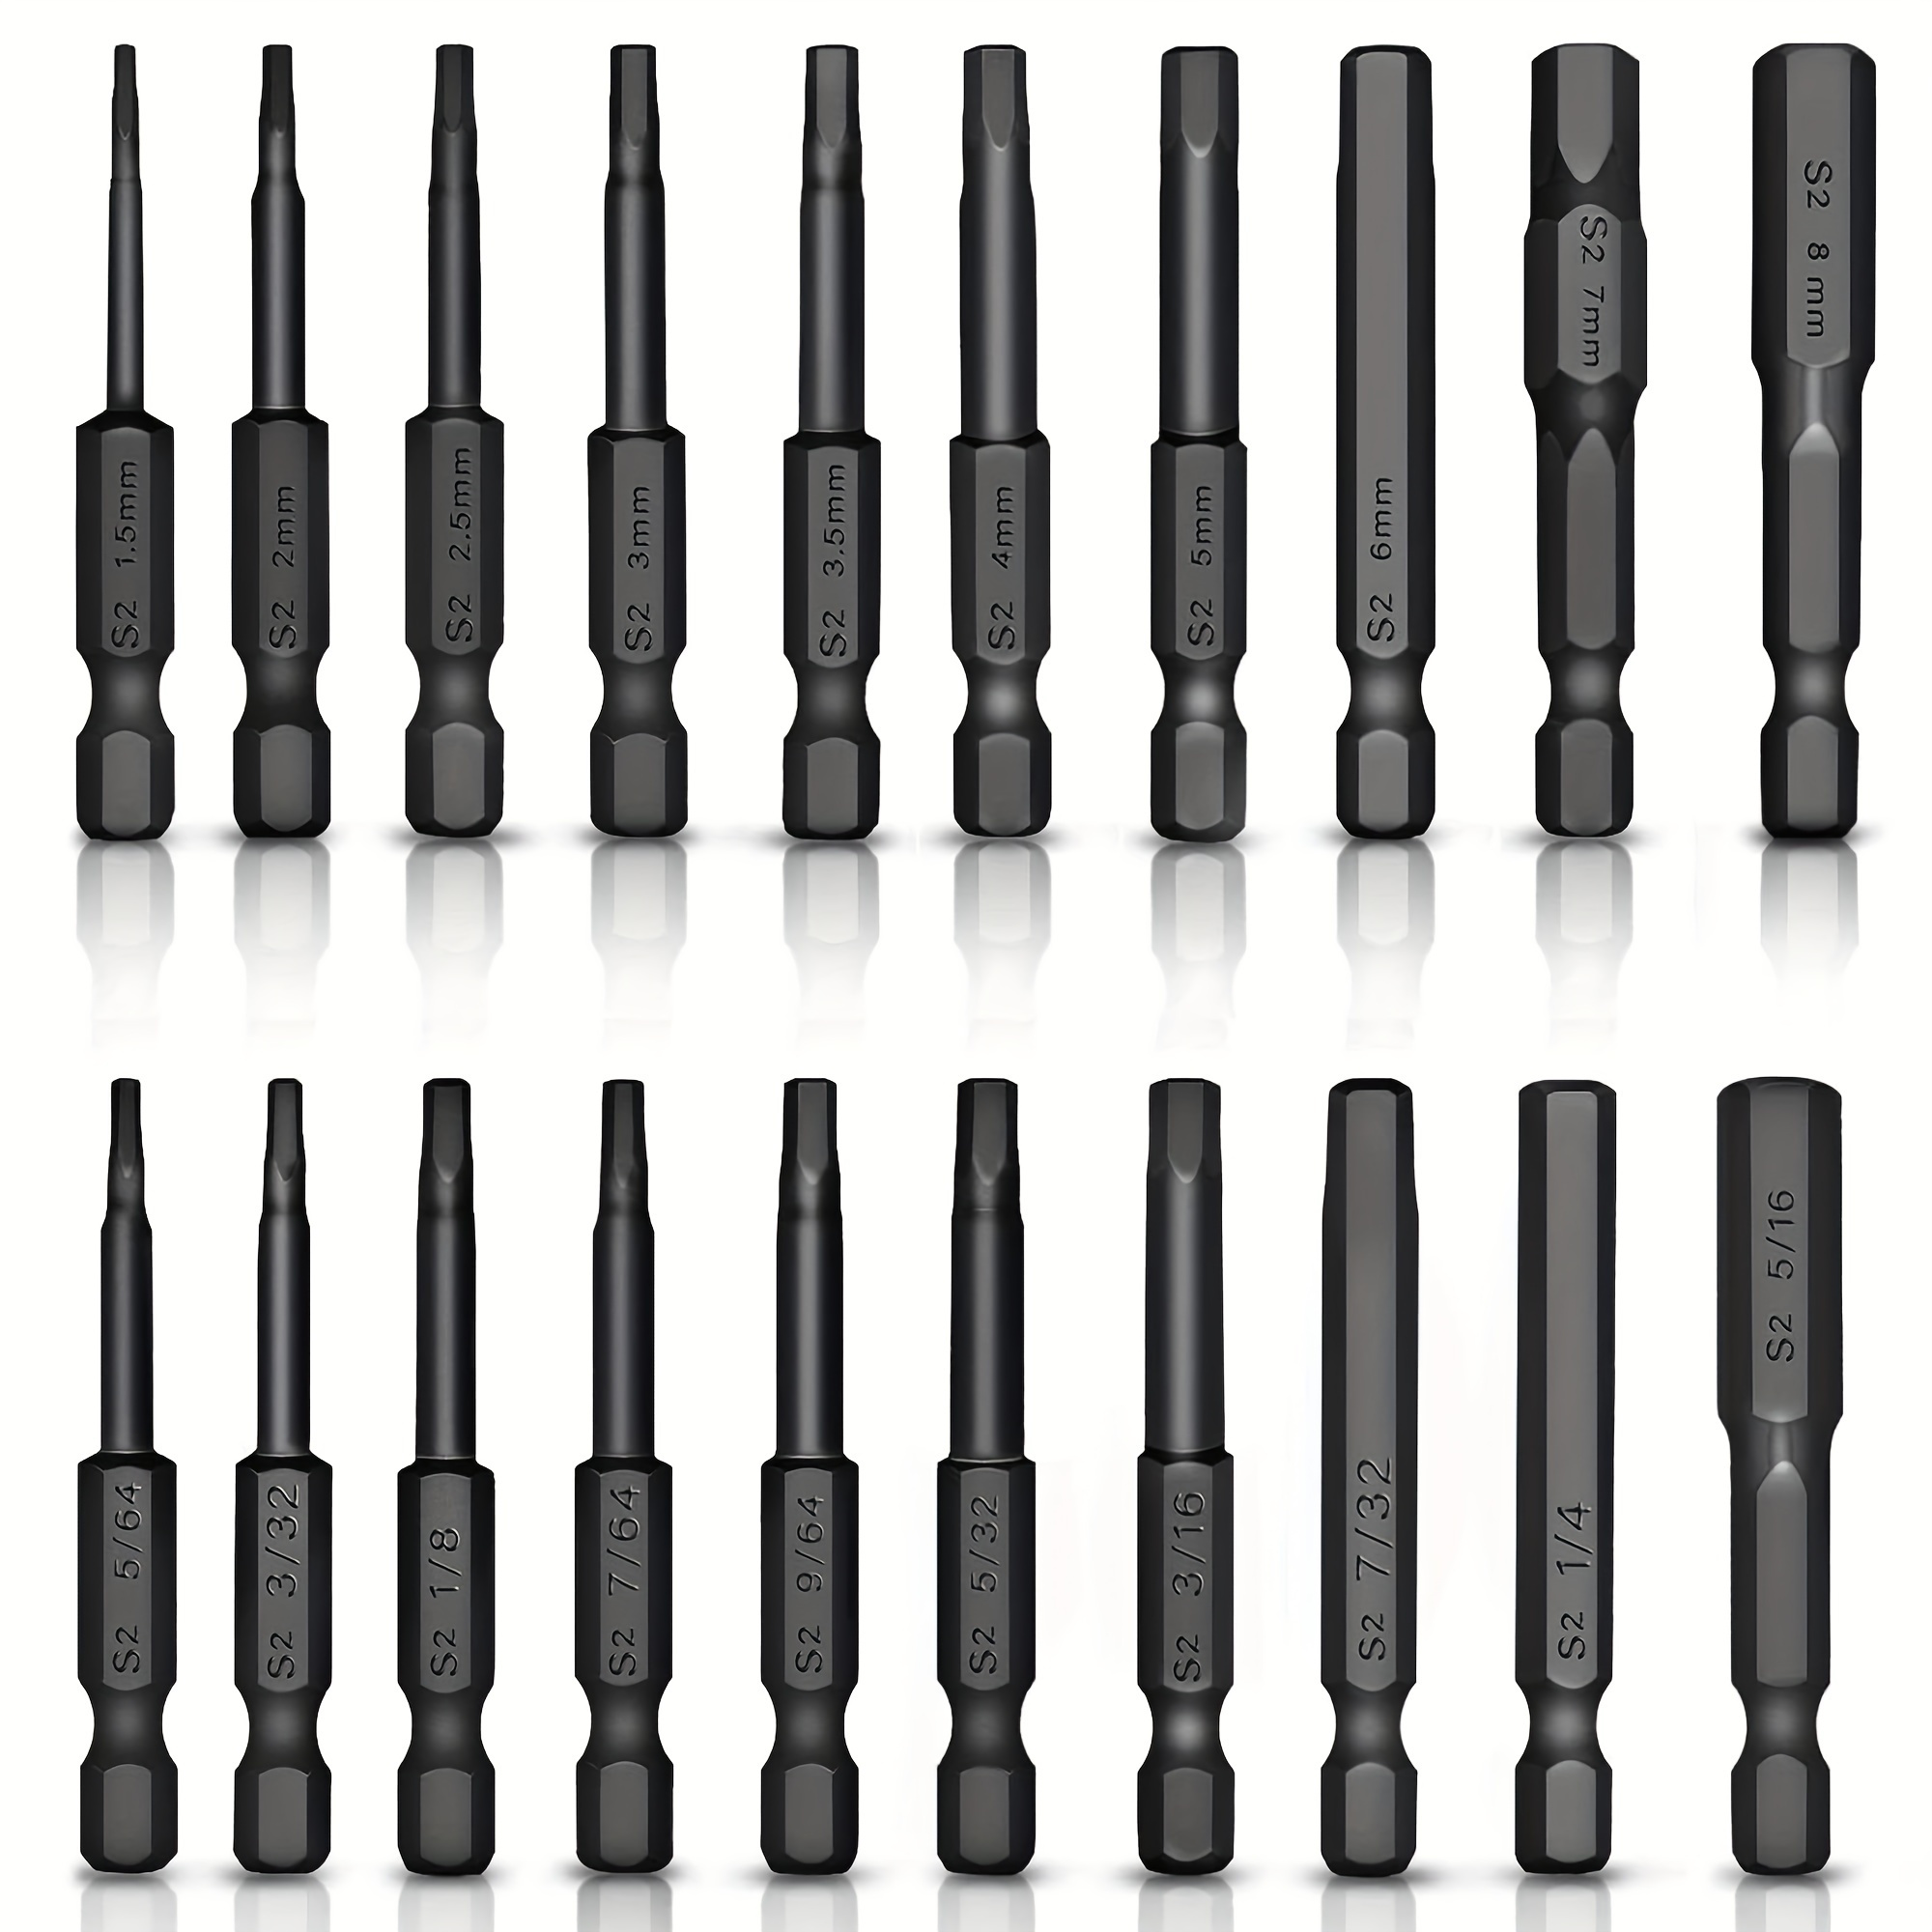 Allen Wrench Metric Fold-Up Hex Key Set 1.5 mm-6.0 mm 7 Pcs Made in US